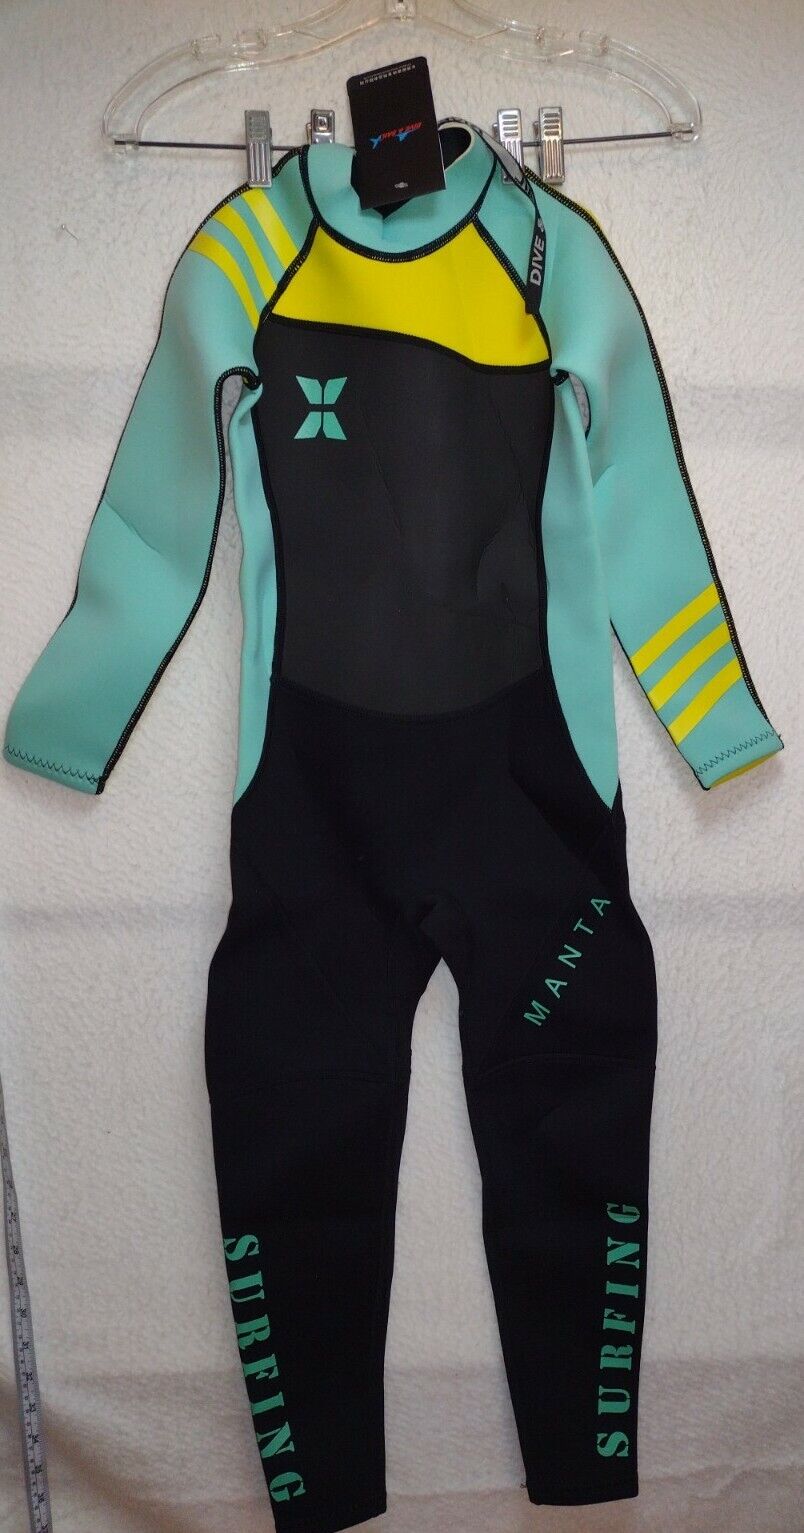 Youth Dive And Sail Wet Suit Manta Surfing Beach Wear Size Xl Kids Nwt. A4